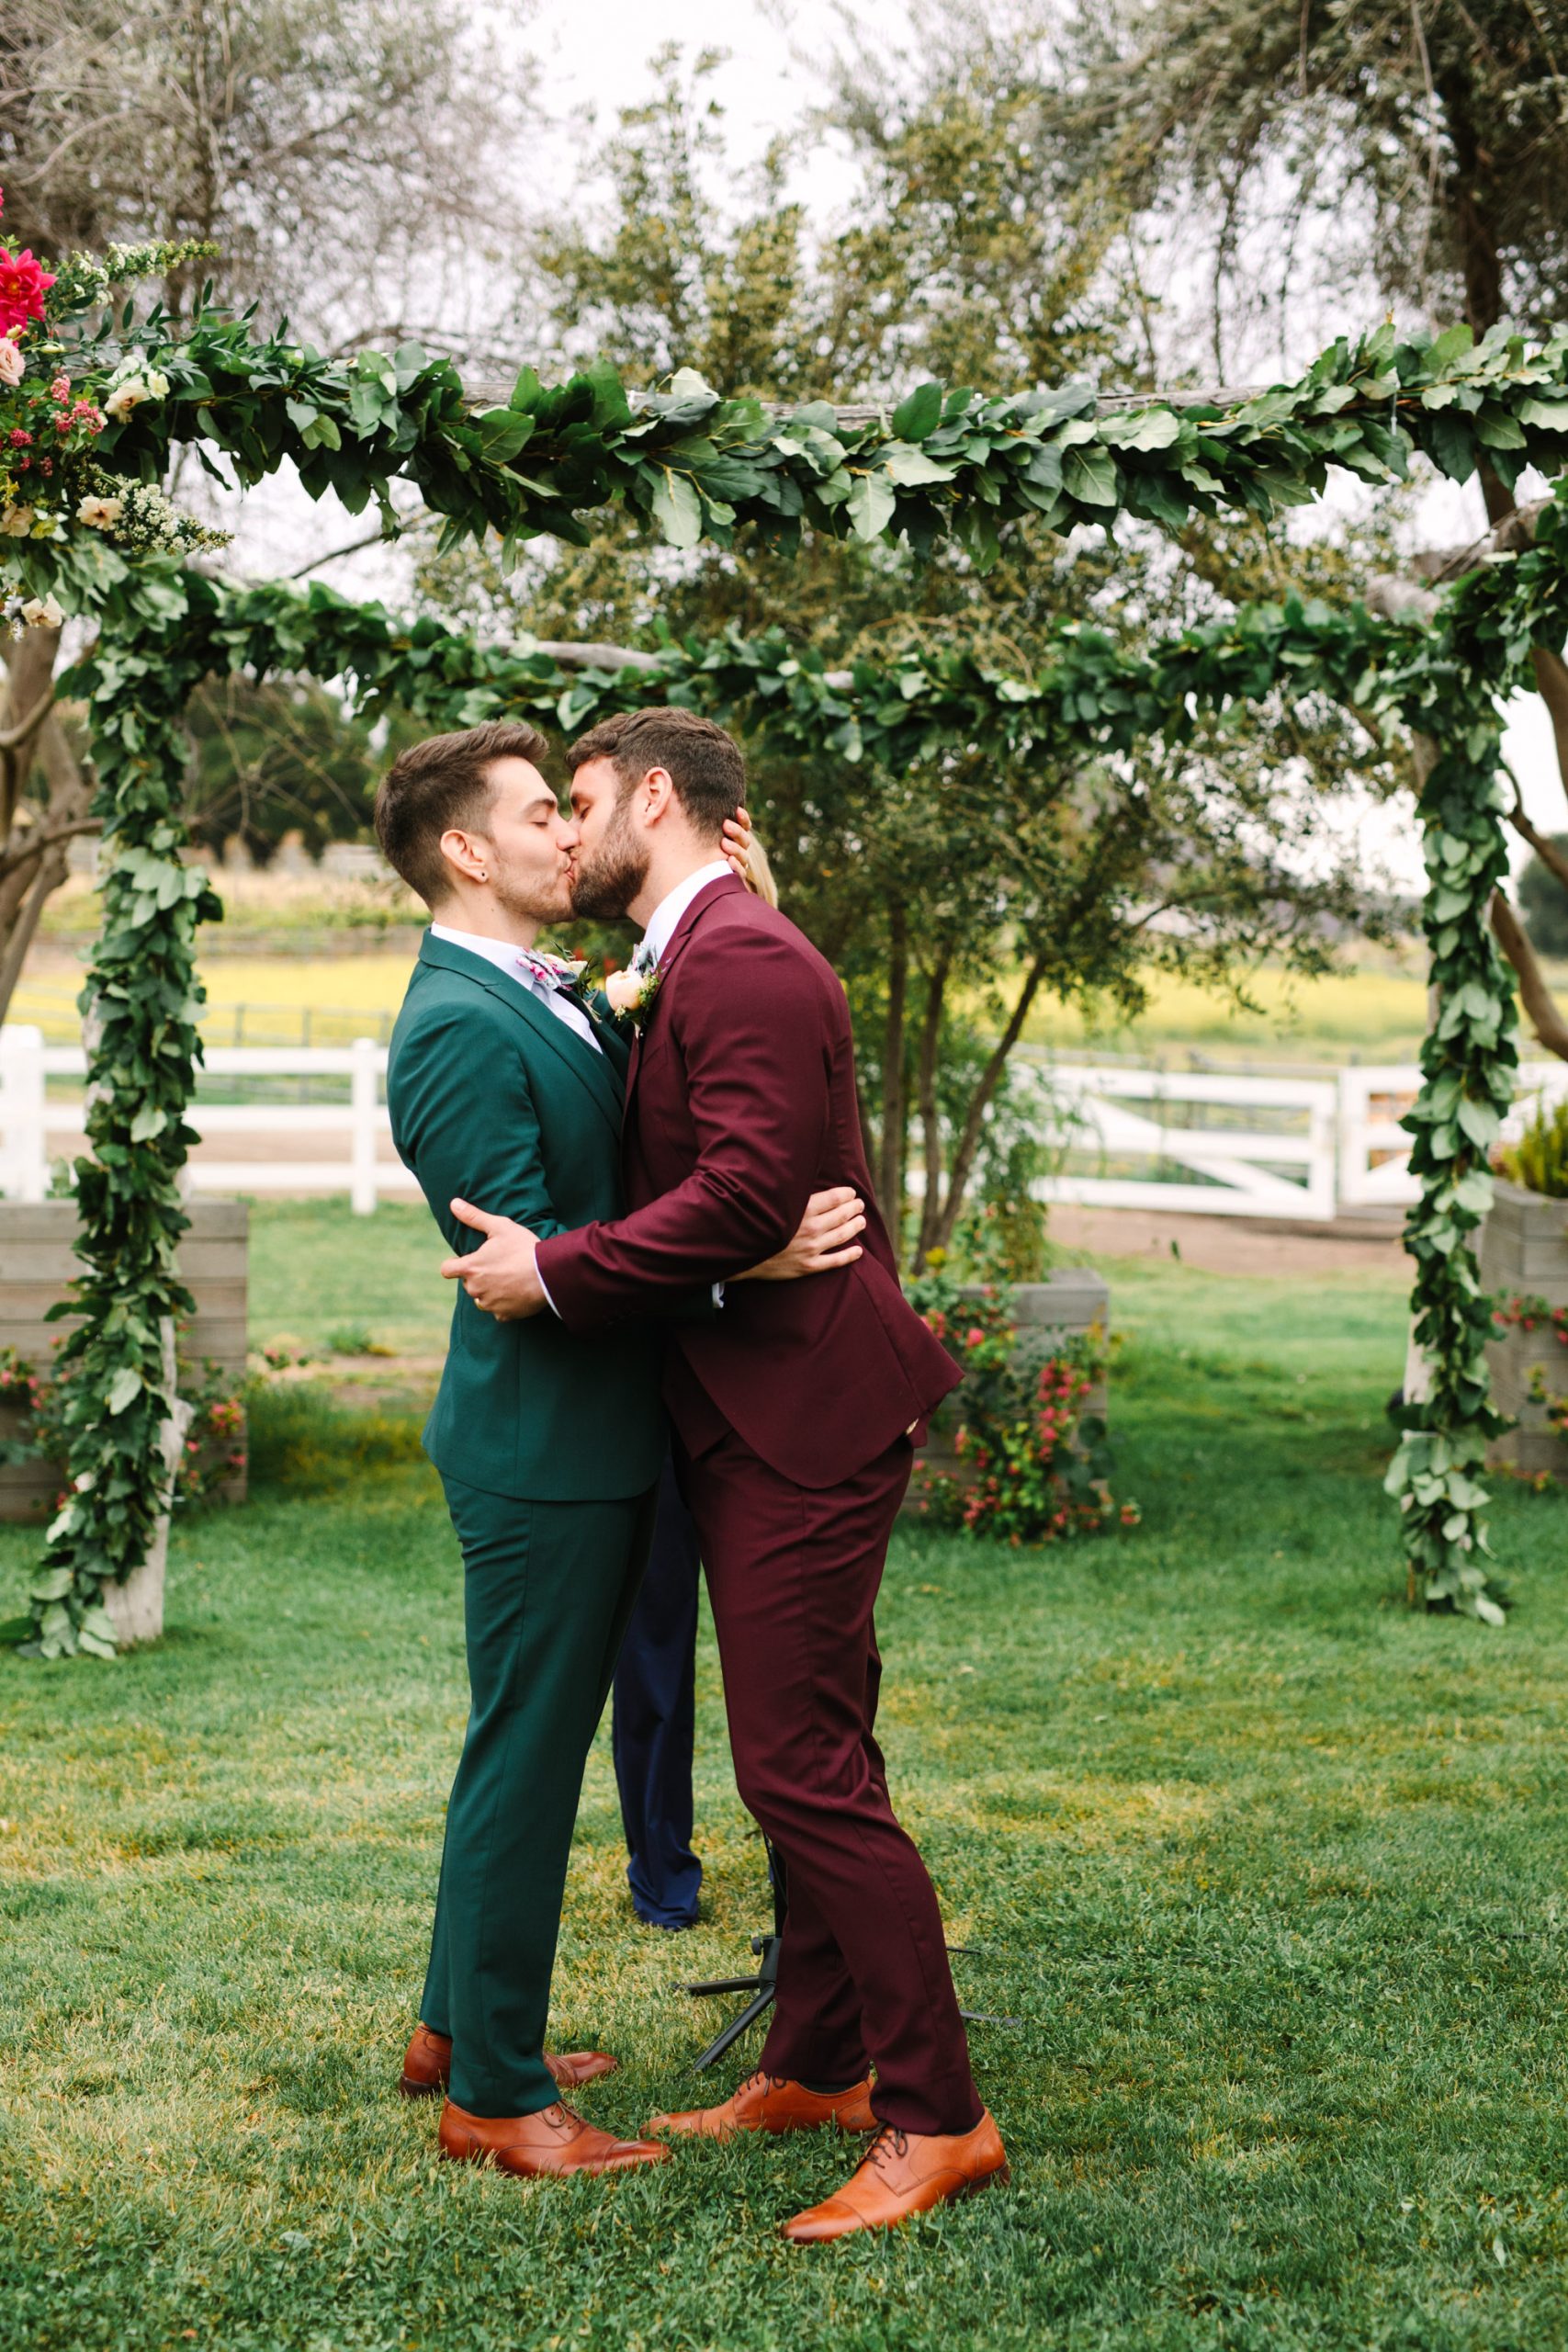 Adam and KC kissing during wedding ceremony by Mary Costa Photography